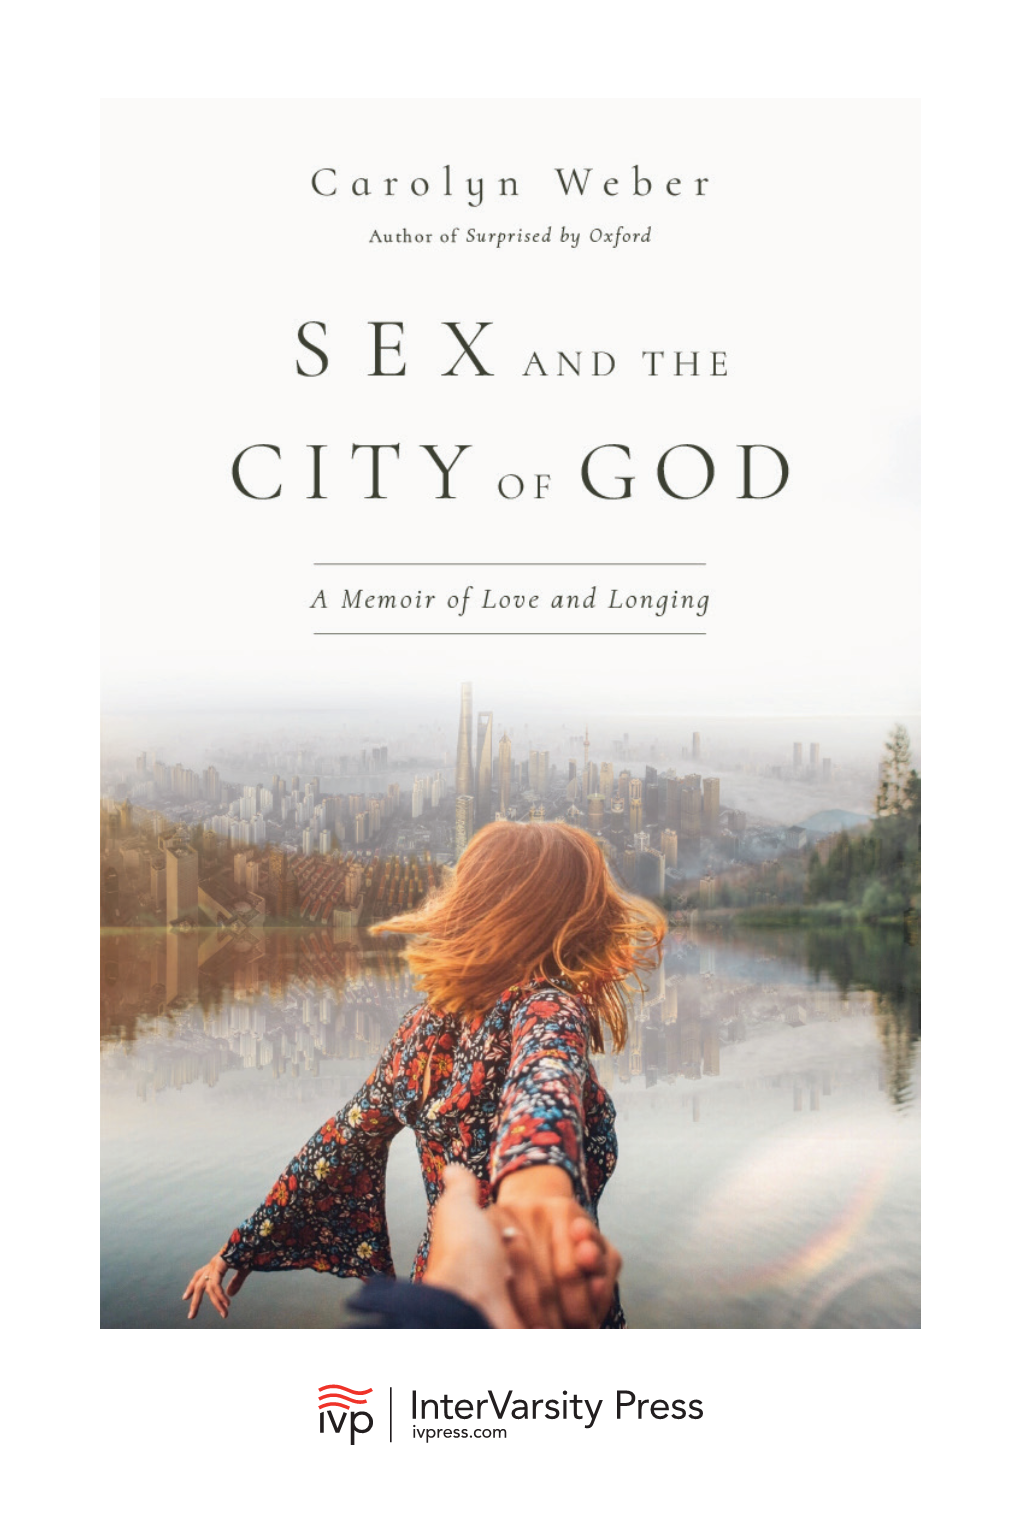 Sex and the City of God by Carolyn Weber